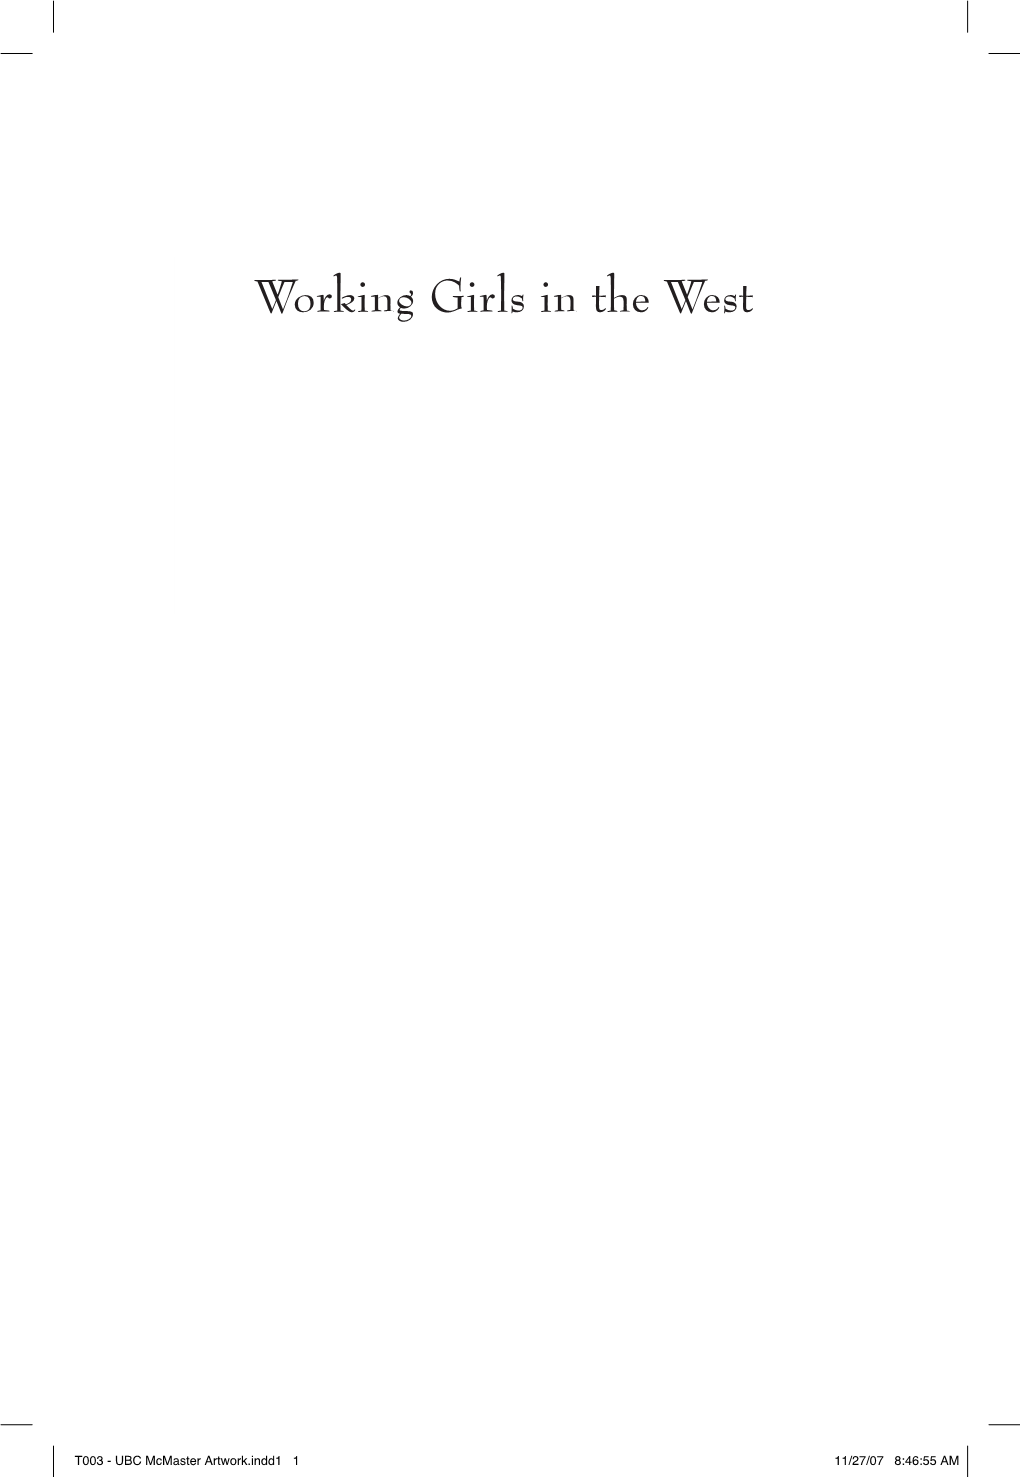 Working Girls in the West